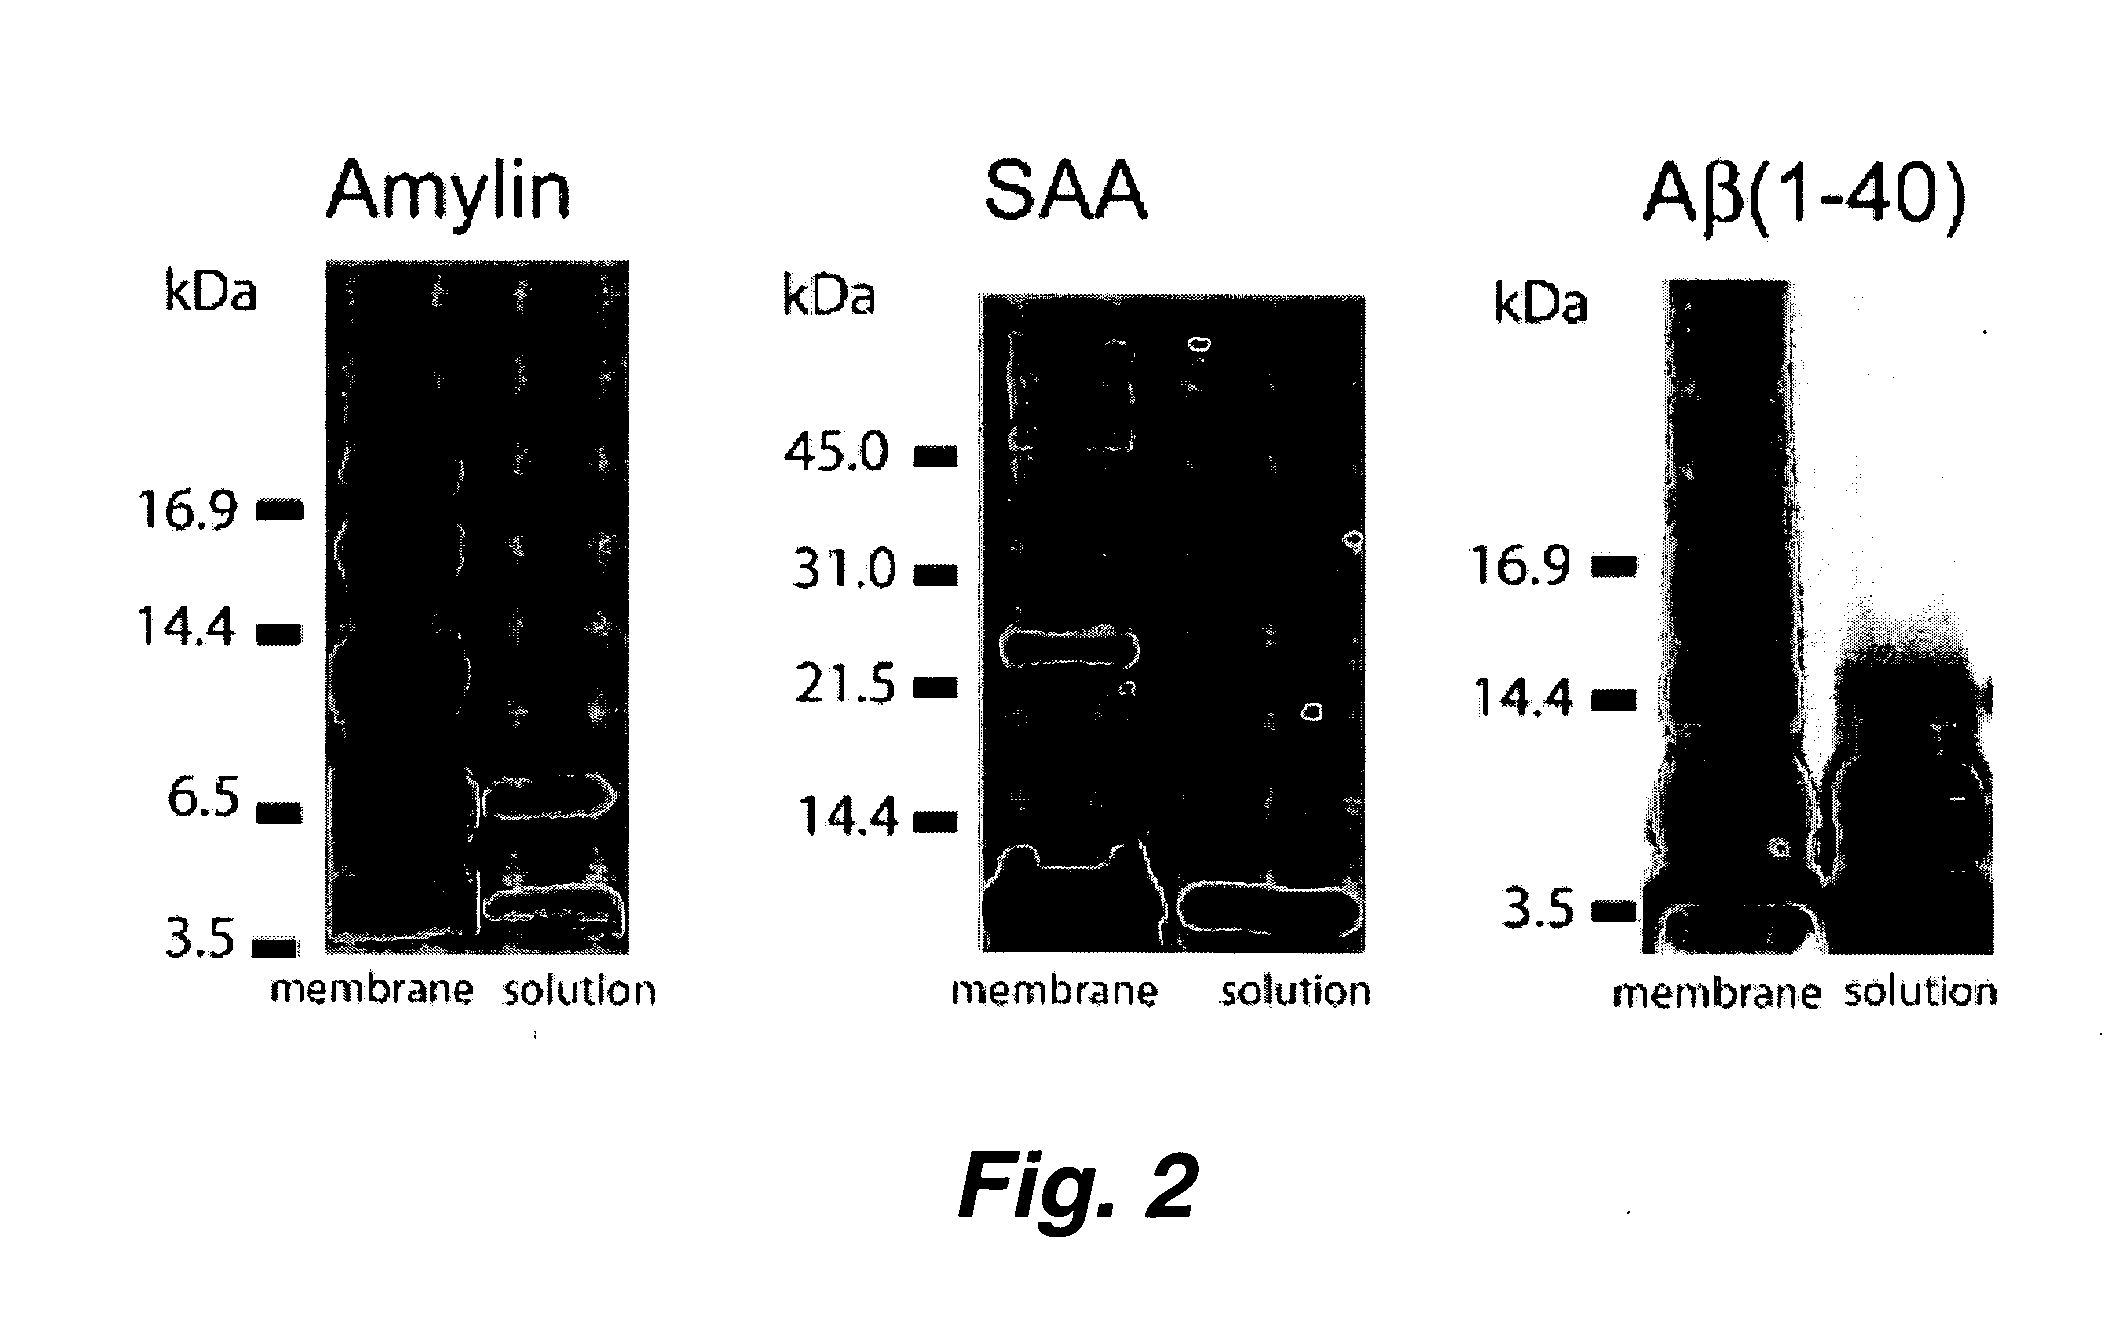 Amyloid beta protein channel structure and uses thereof in identifying potential drug molecules for neurodegenerative diseases